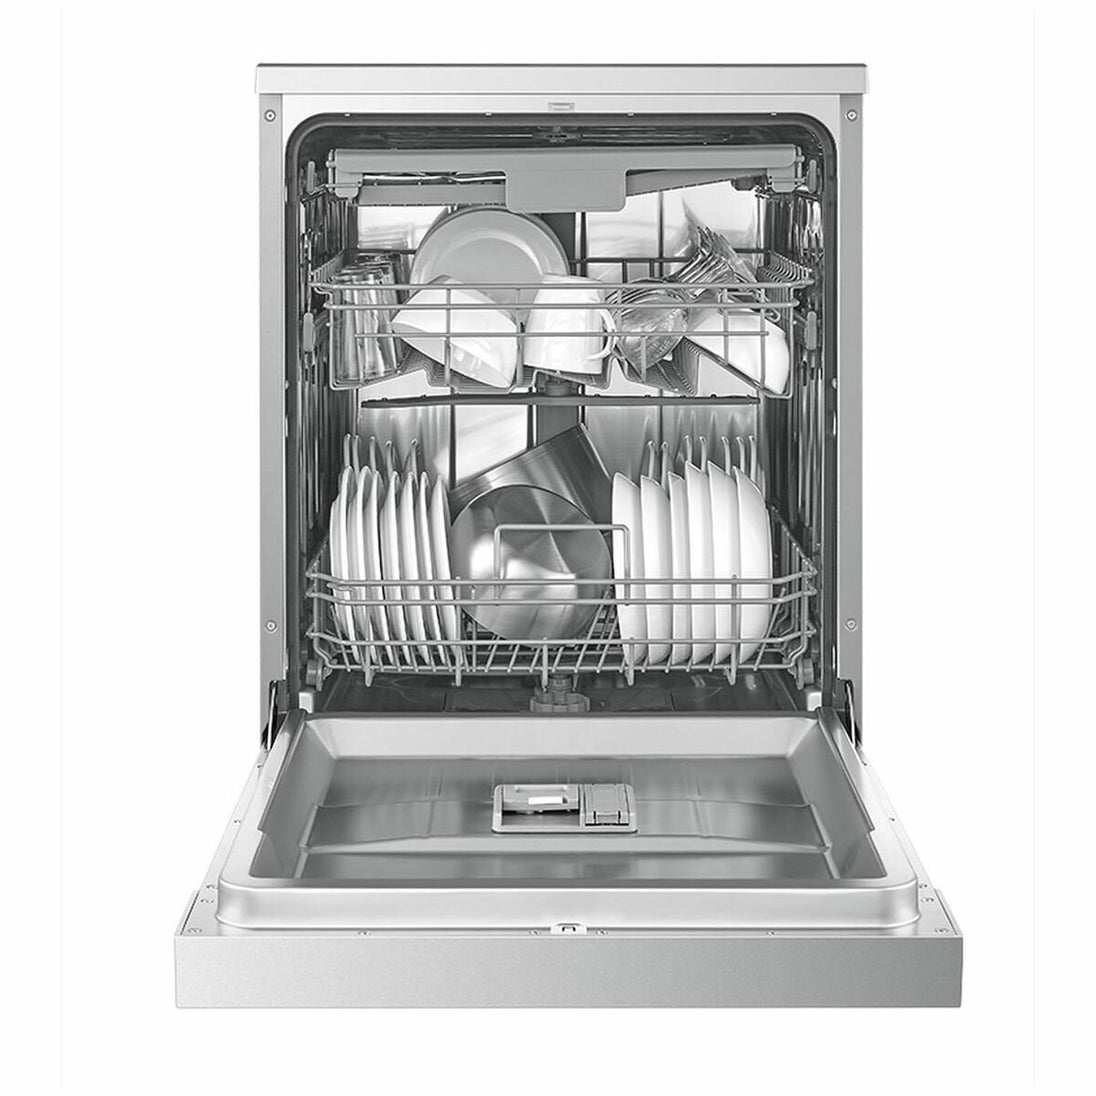 732745d4b32cceccbd31ee7c5030f28a3ebe4185_hisense_60cm_freestanding_stainless_steel_dishwasher_hsce14fs_7_4c0a3aba_high-high